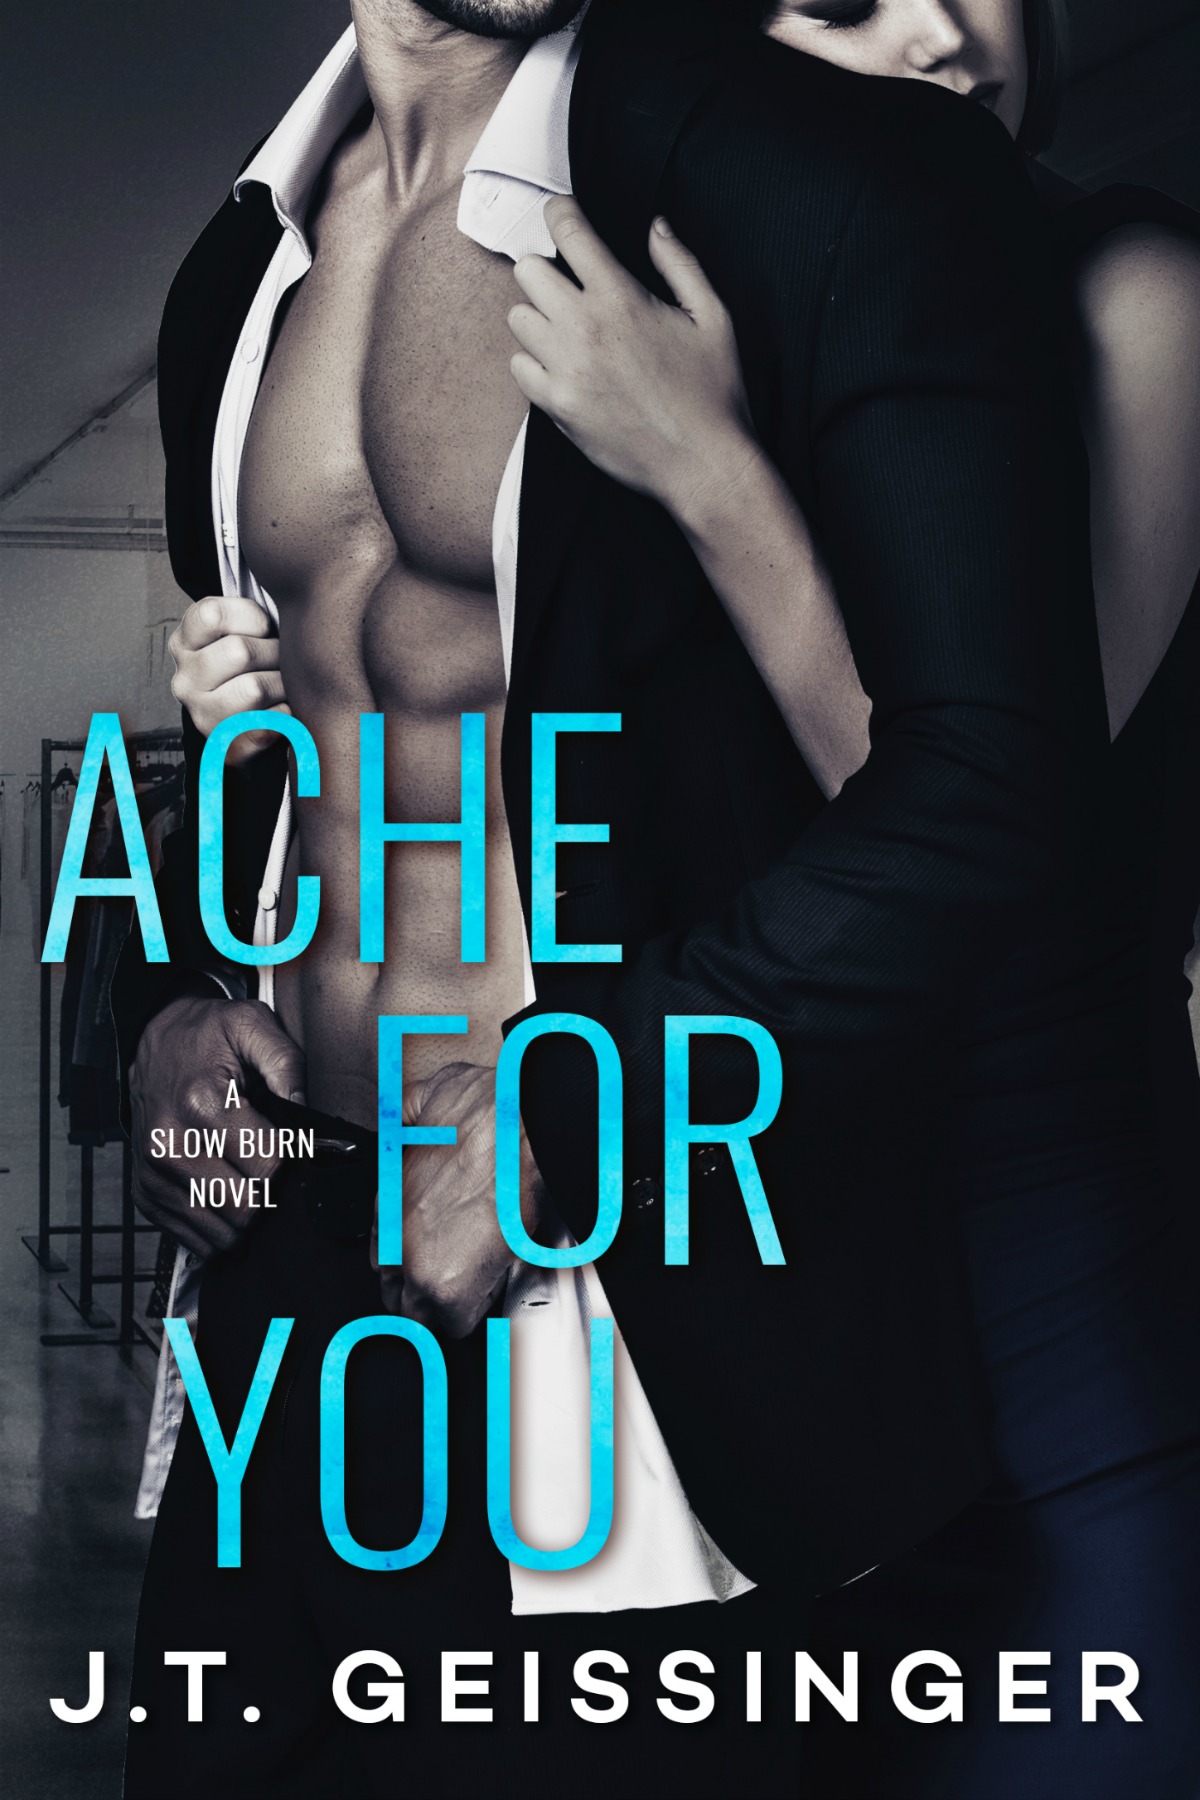 Ache for You by J. T. Geissinger [Review]